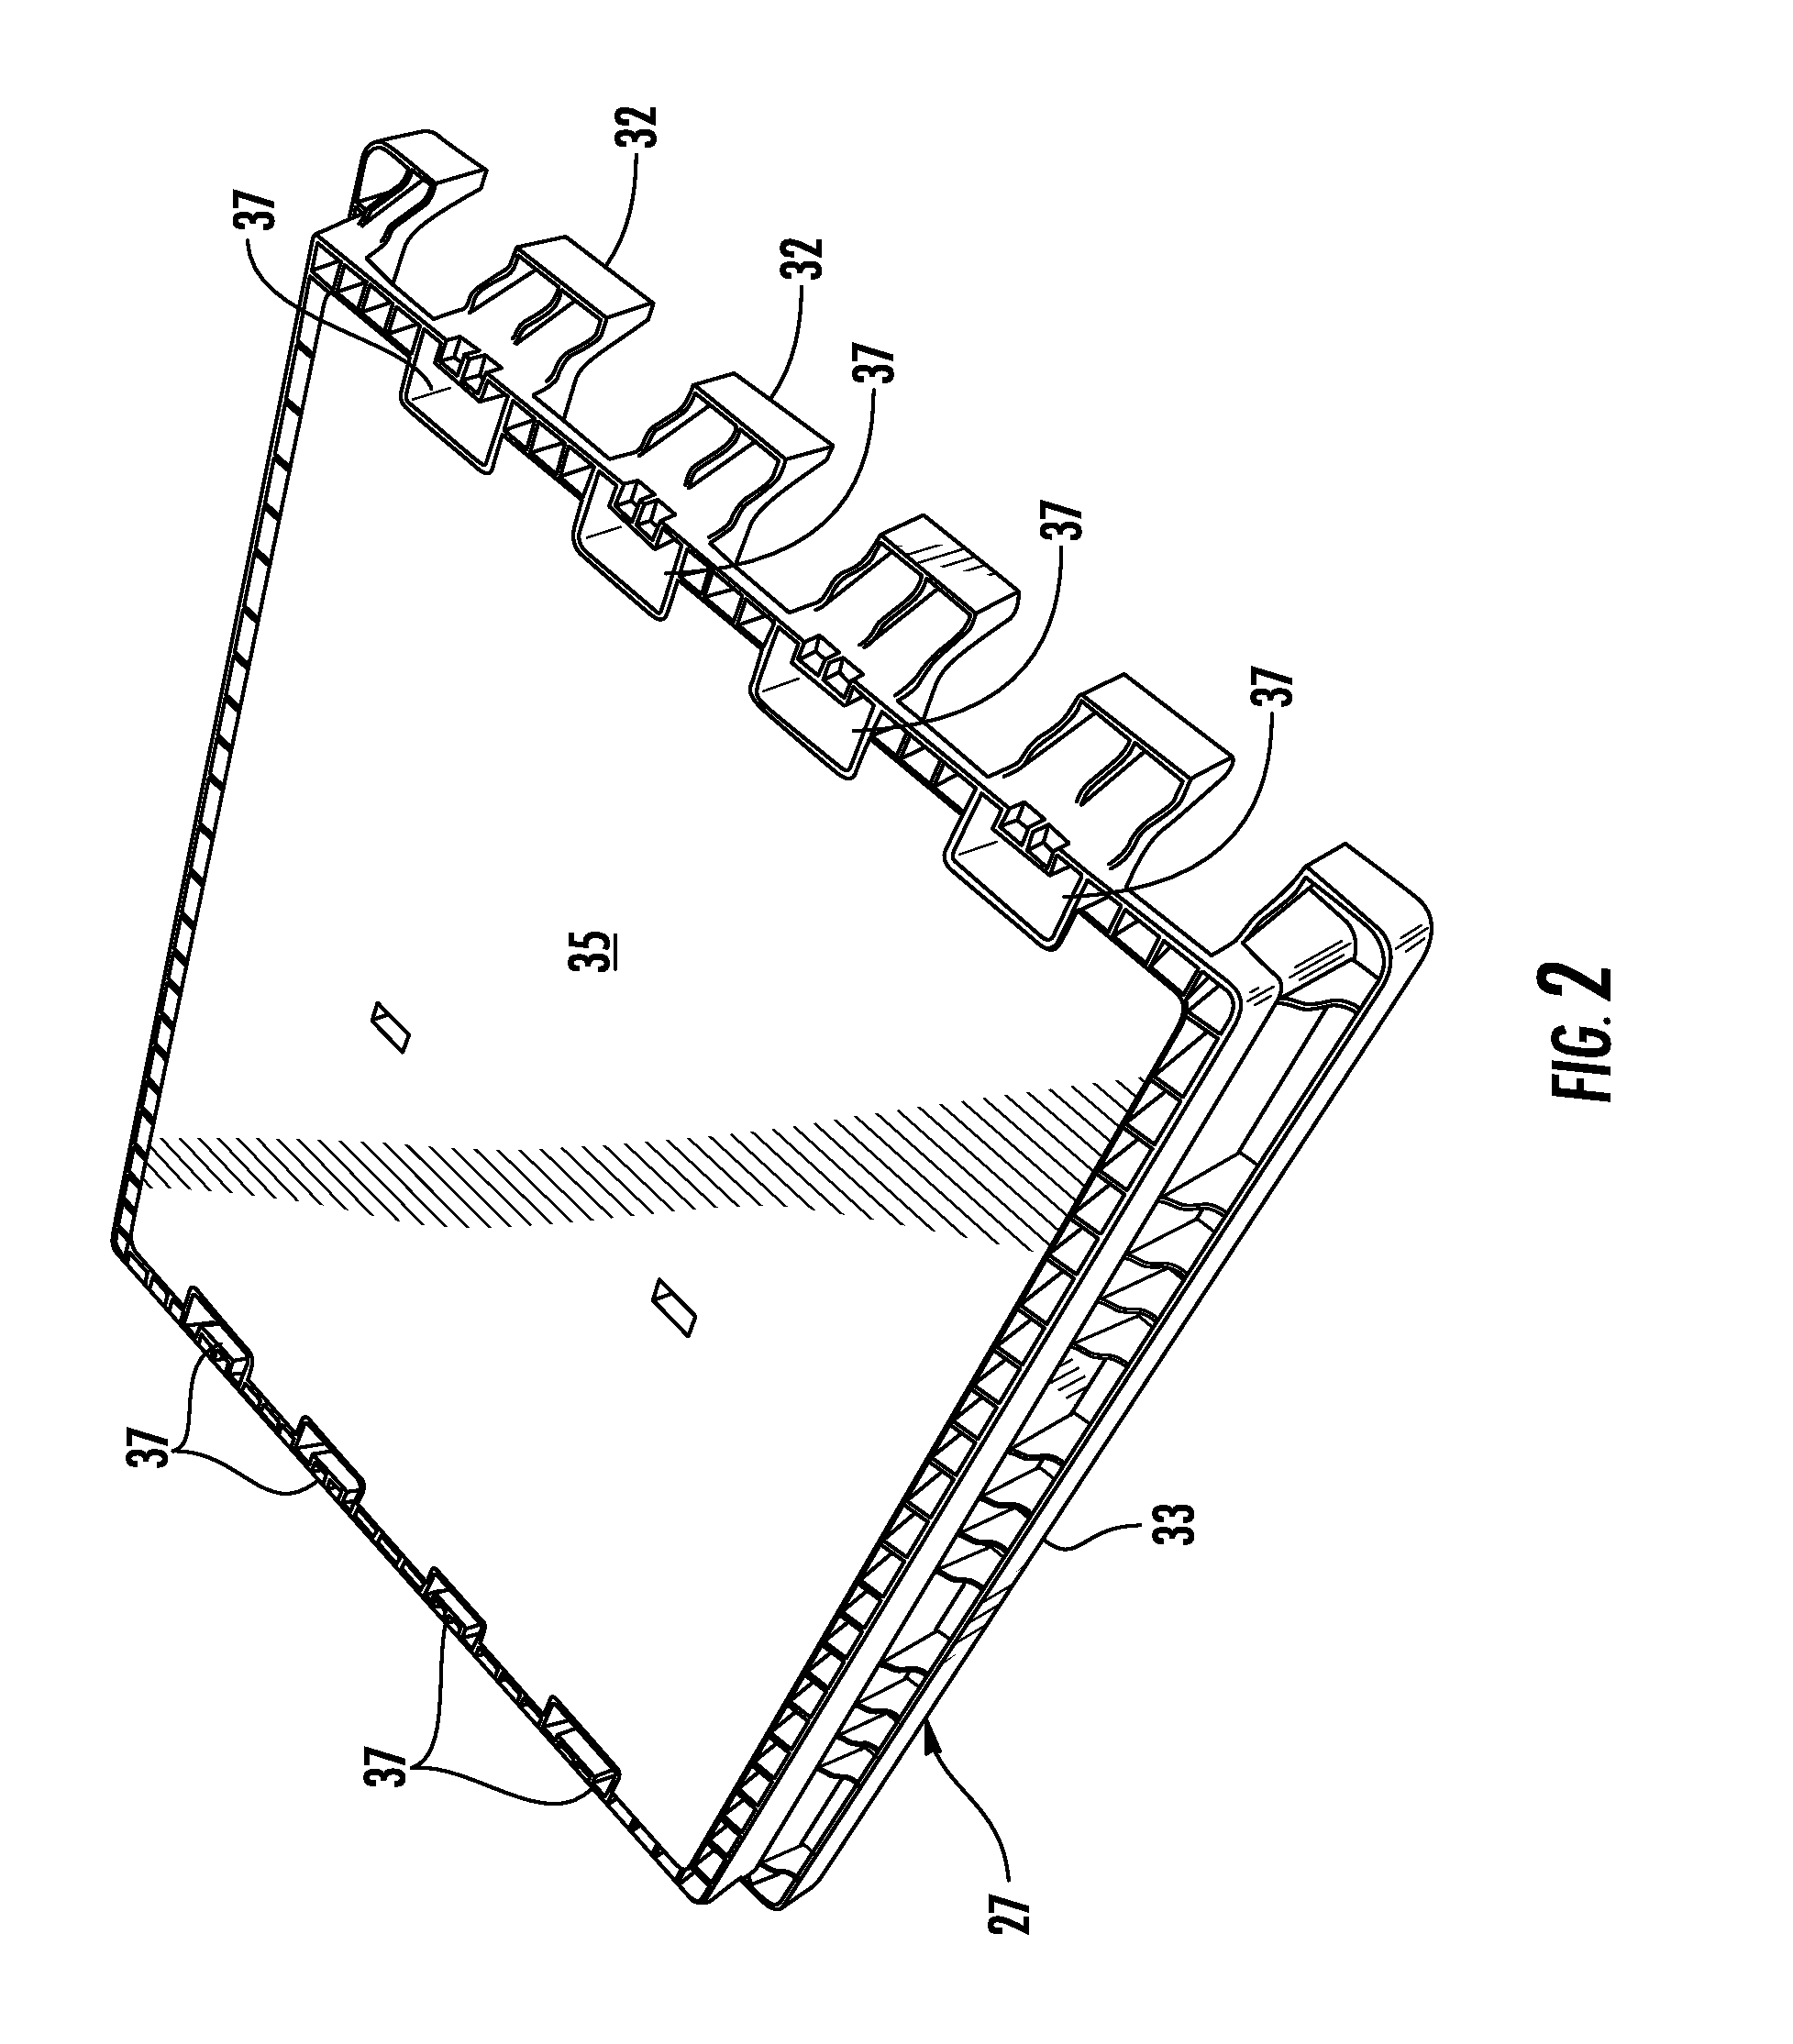 Article tray and handling of articles with the tray